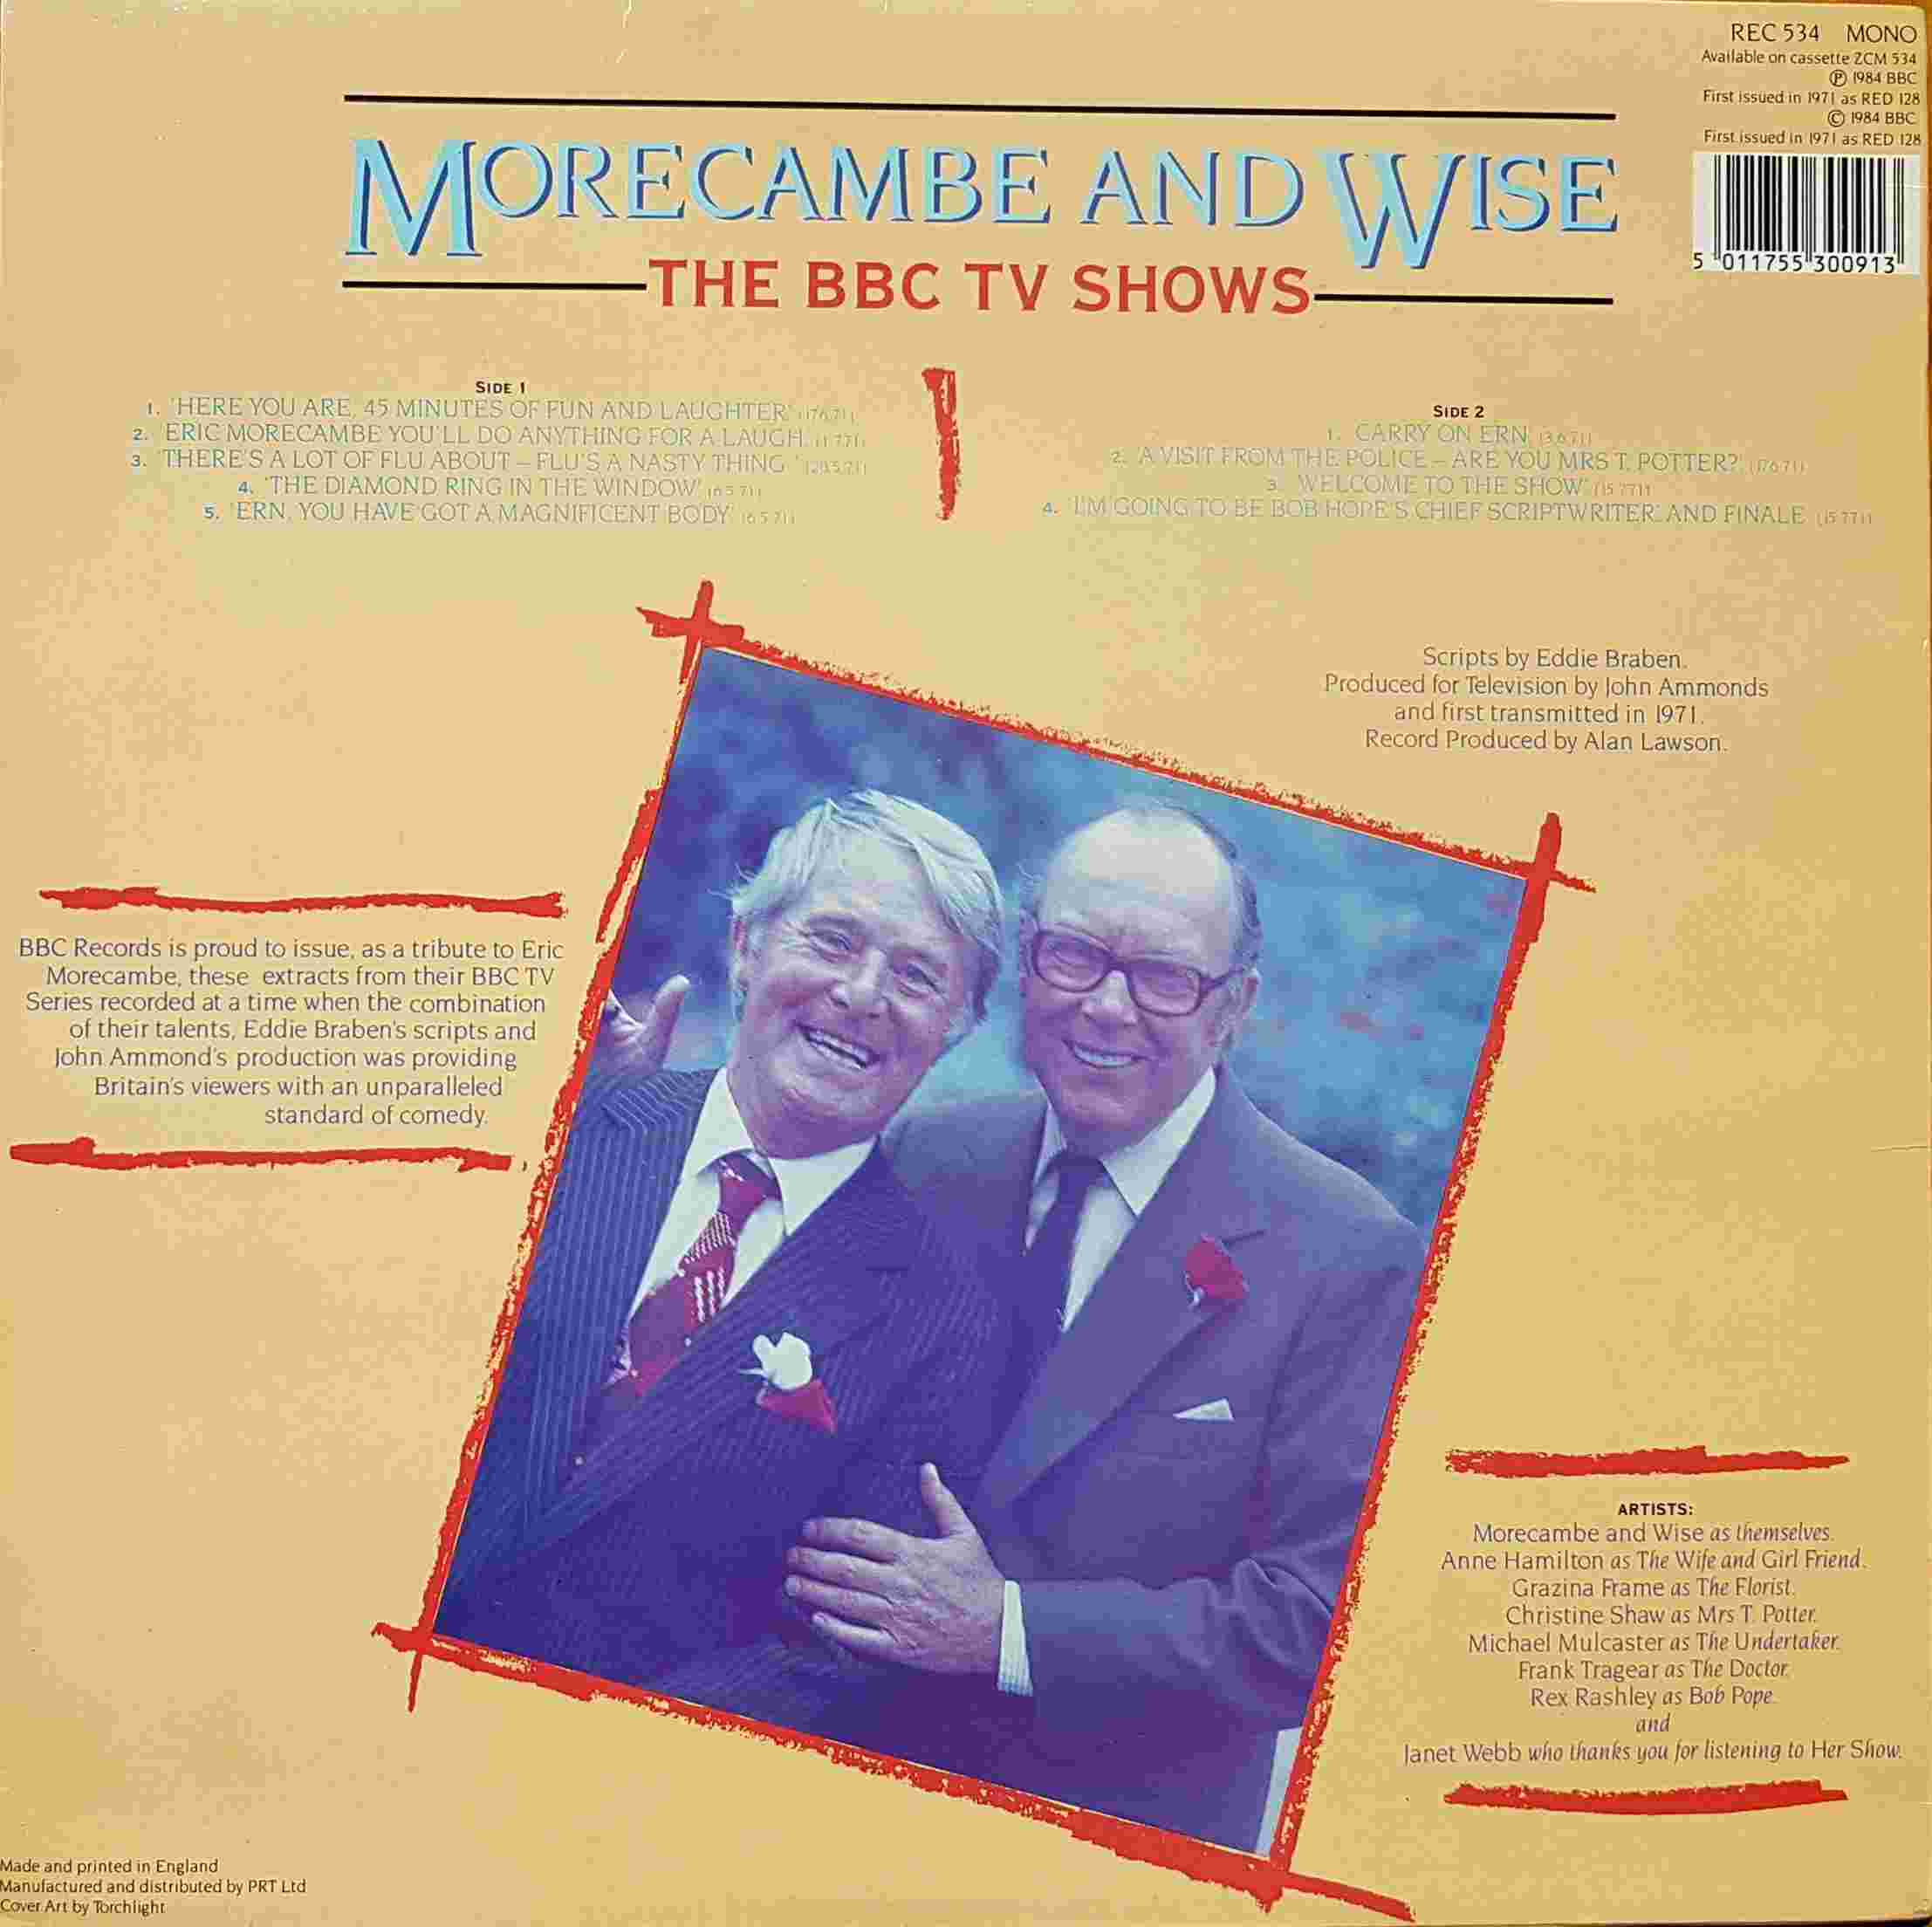 Picture of REC 534 Morecambe and Wise - The TV shows by artist Morecambe / Wise from the BBC records and Tapes library